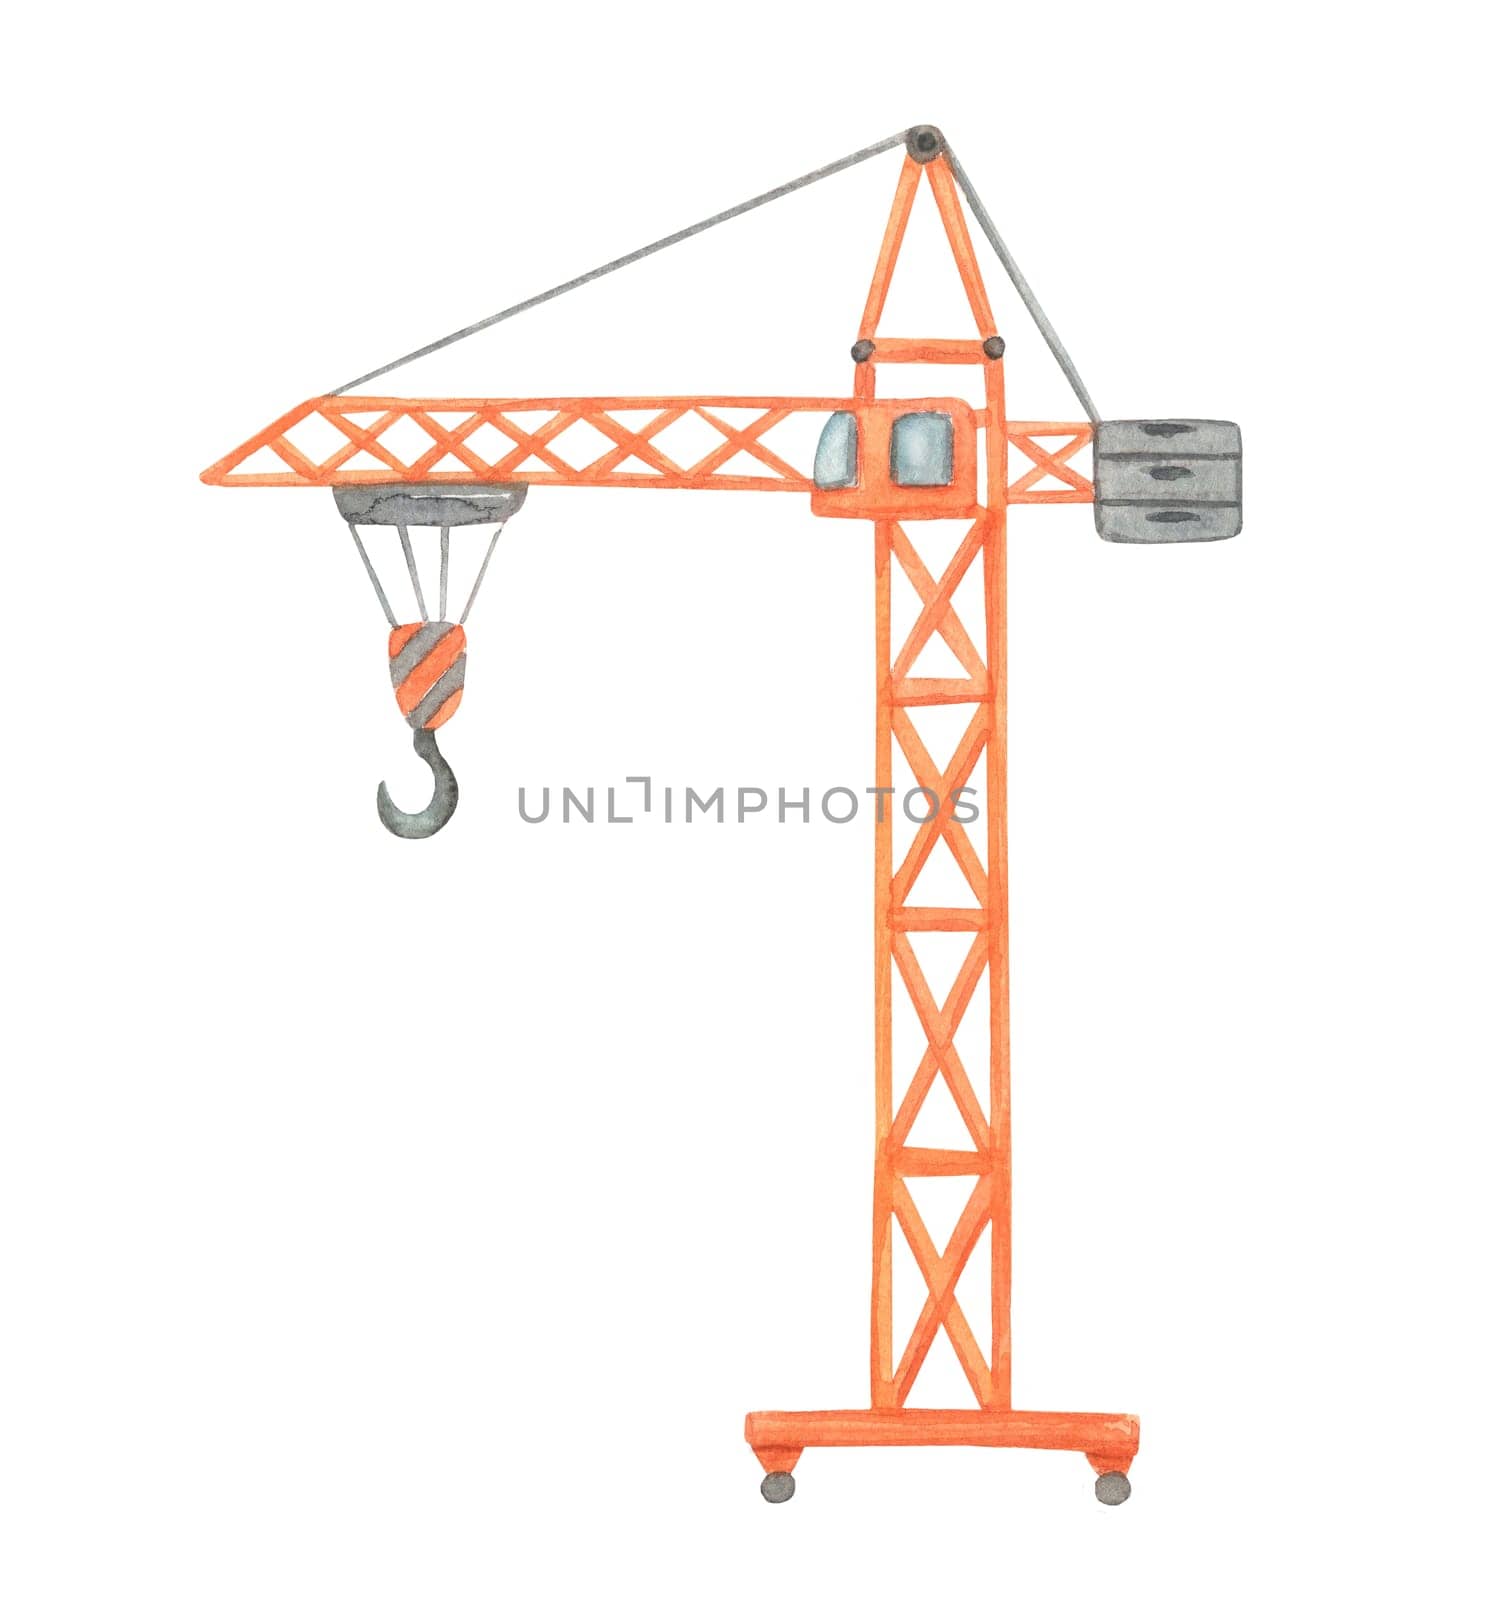 Construction crane. Watercolor illustration isolated on white background. Childish cute construction vehicle